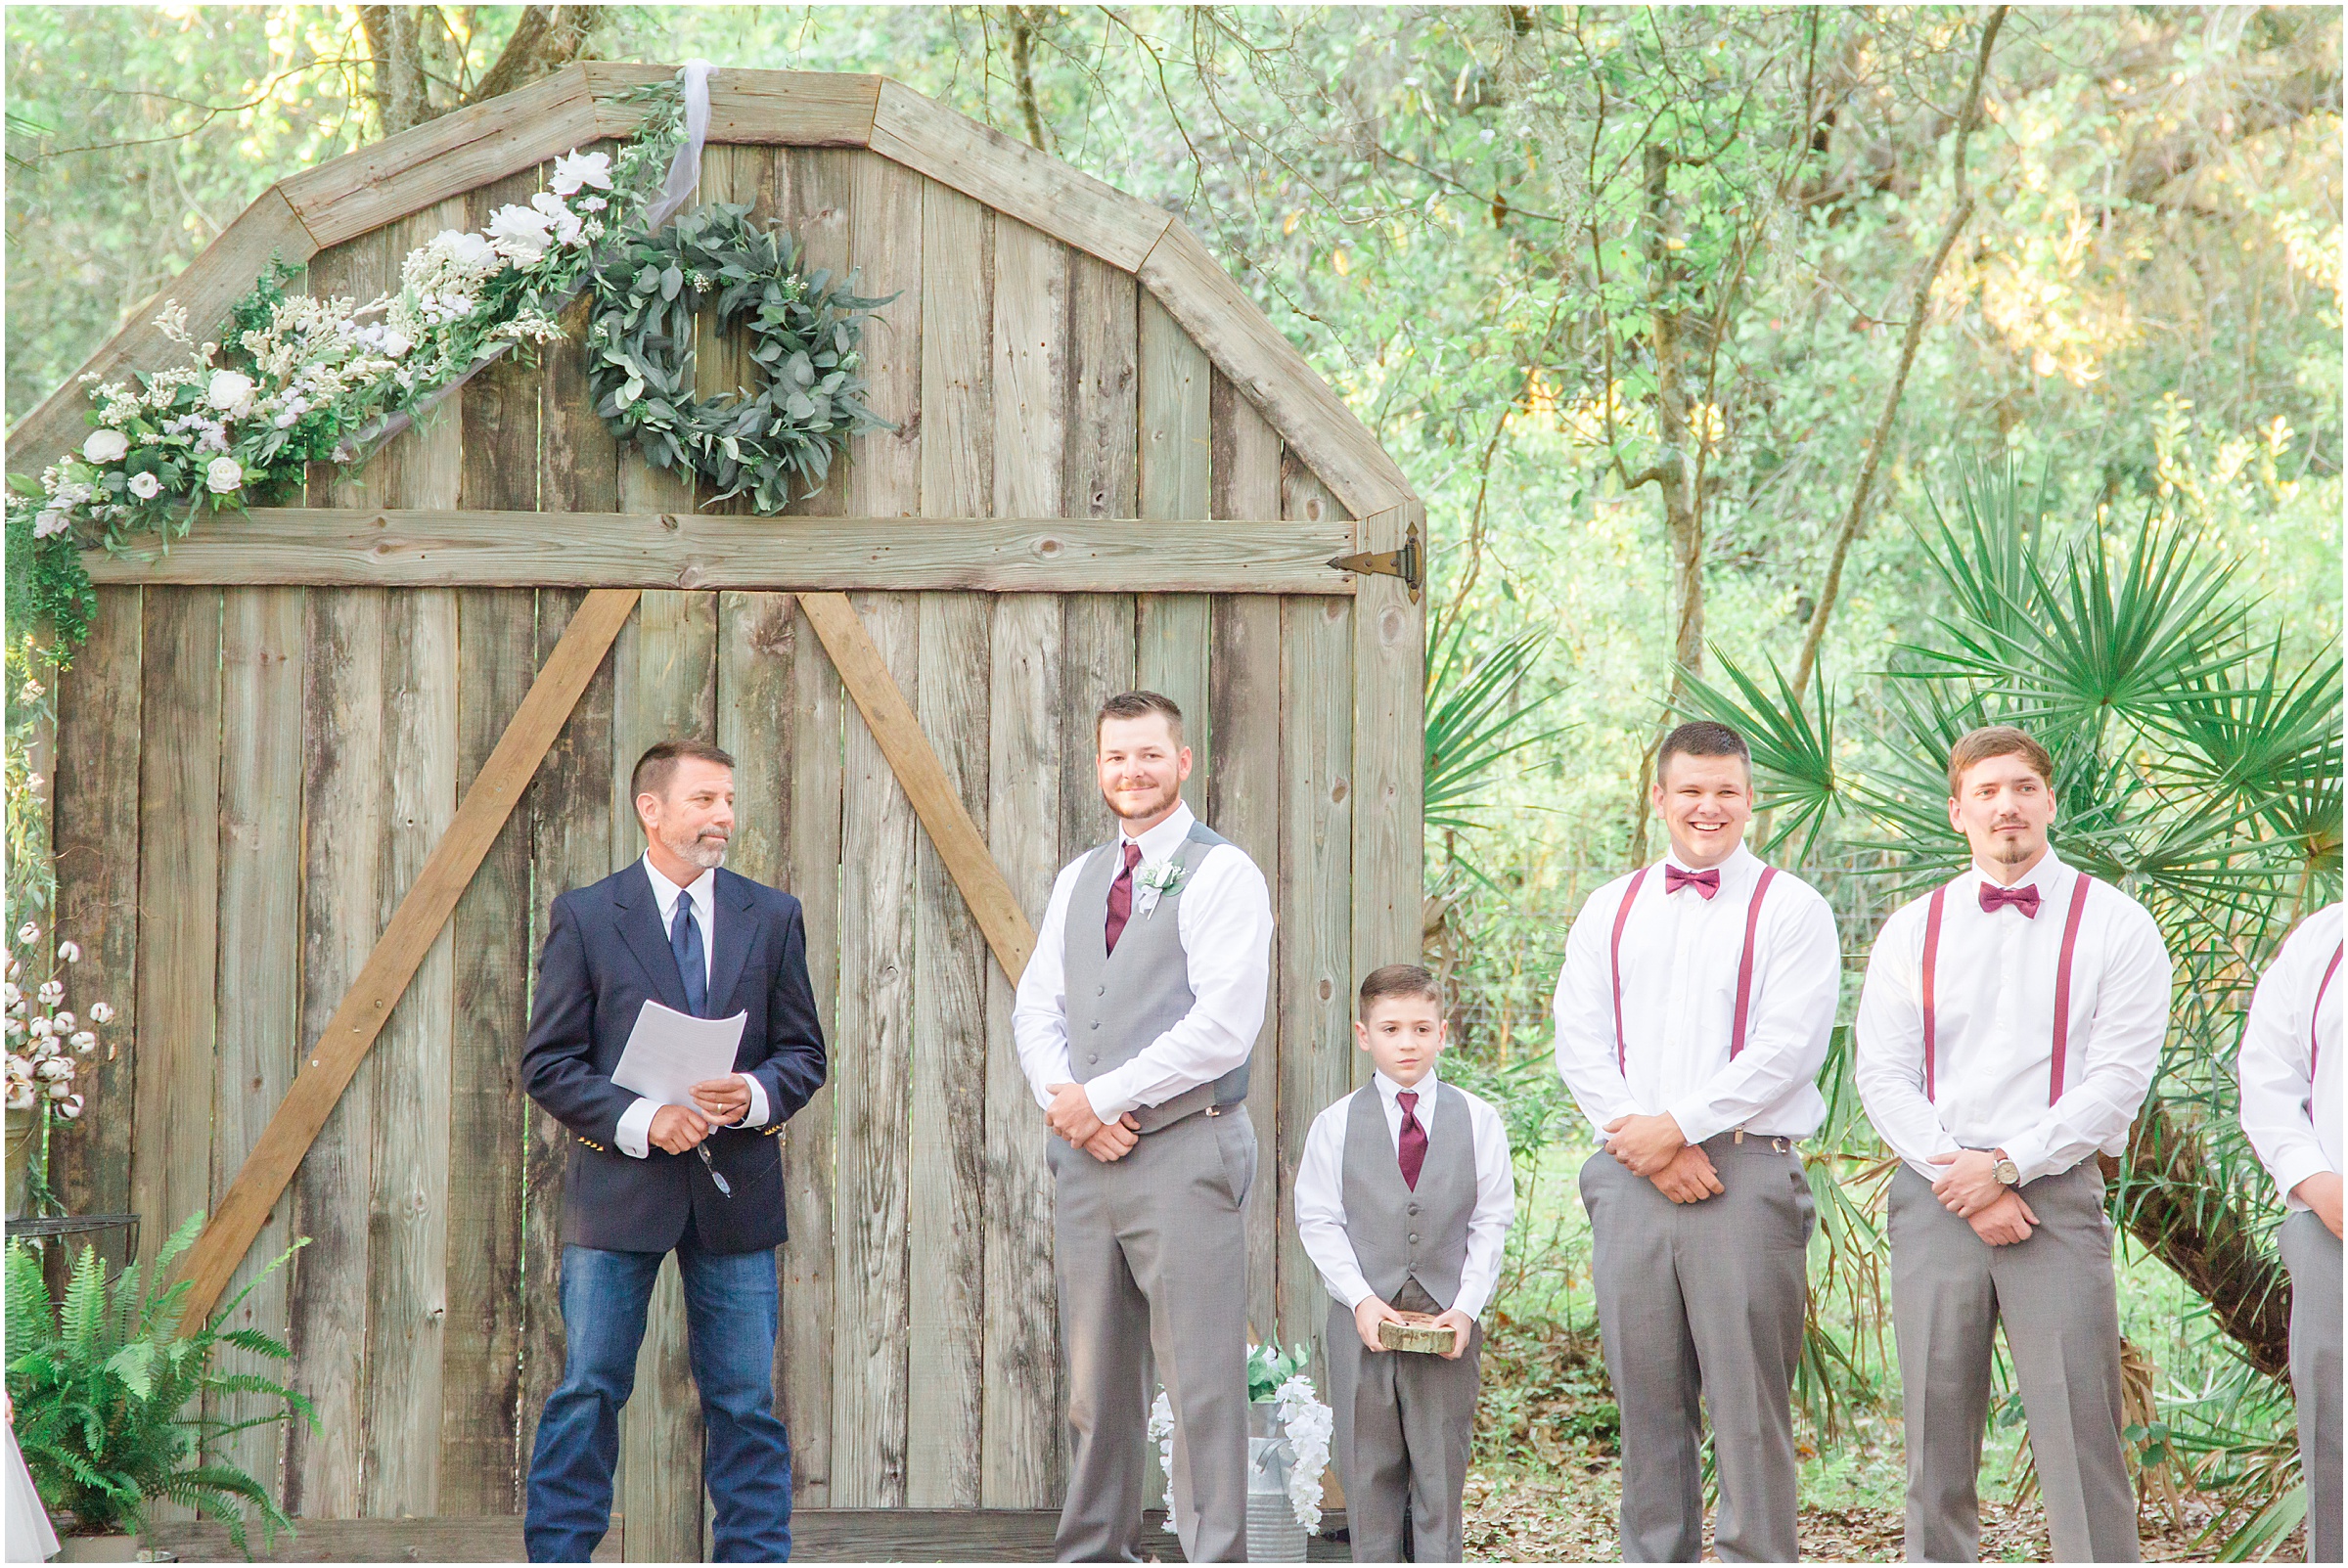 David & Dallas Hodge tied the knot at Arcadia's new rustic venue, Oak Hollow, on Saturday March 2nd surrounded by their closes family and friends.